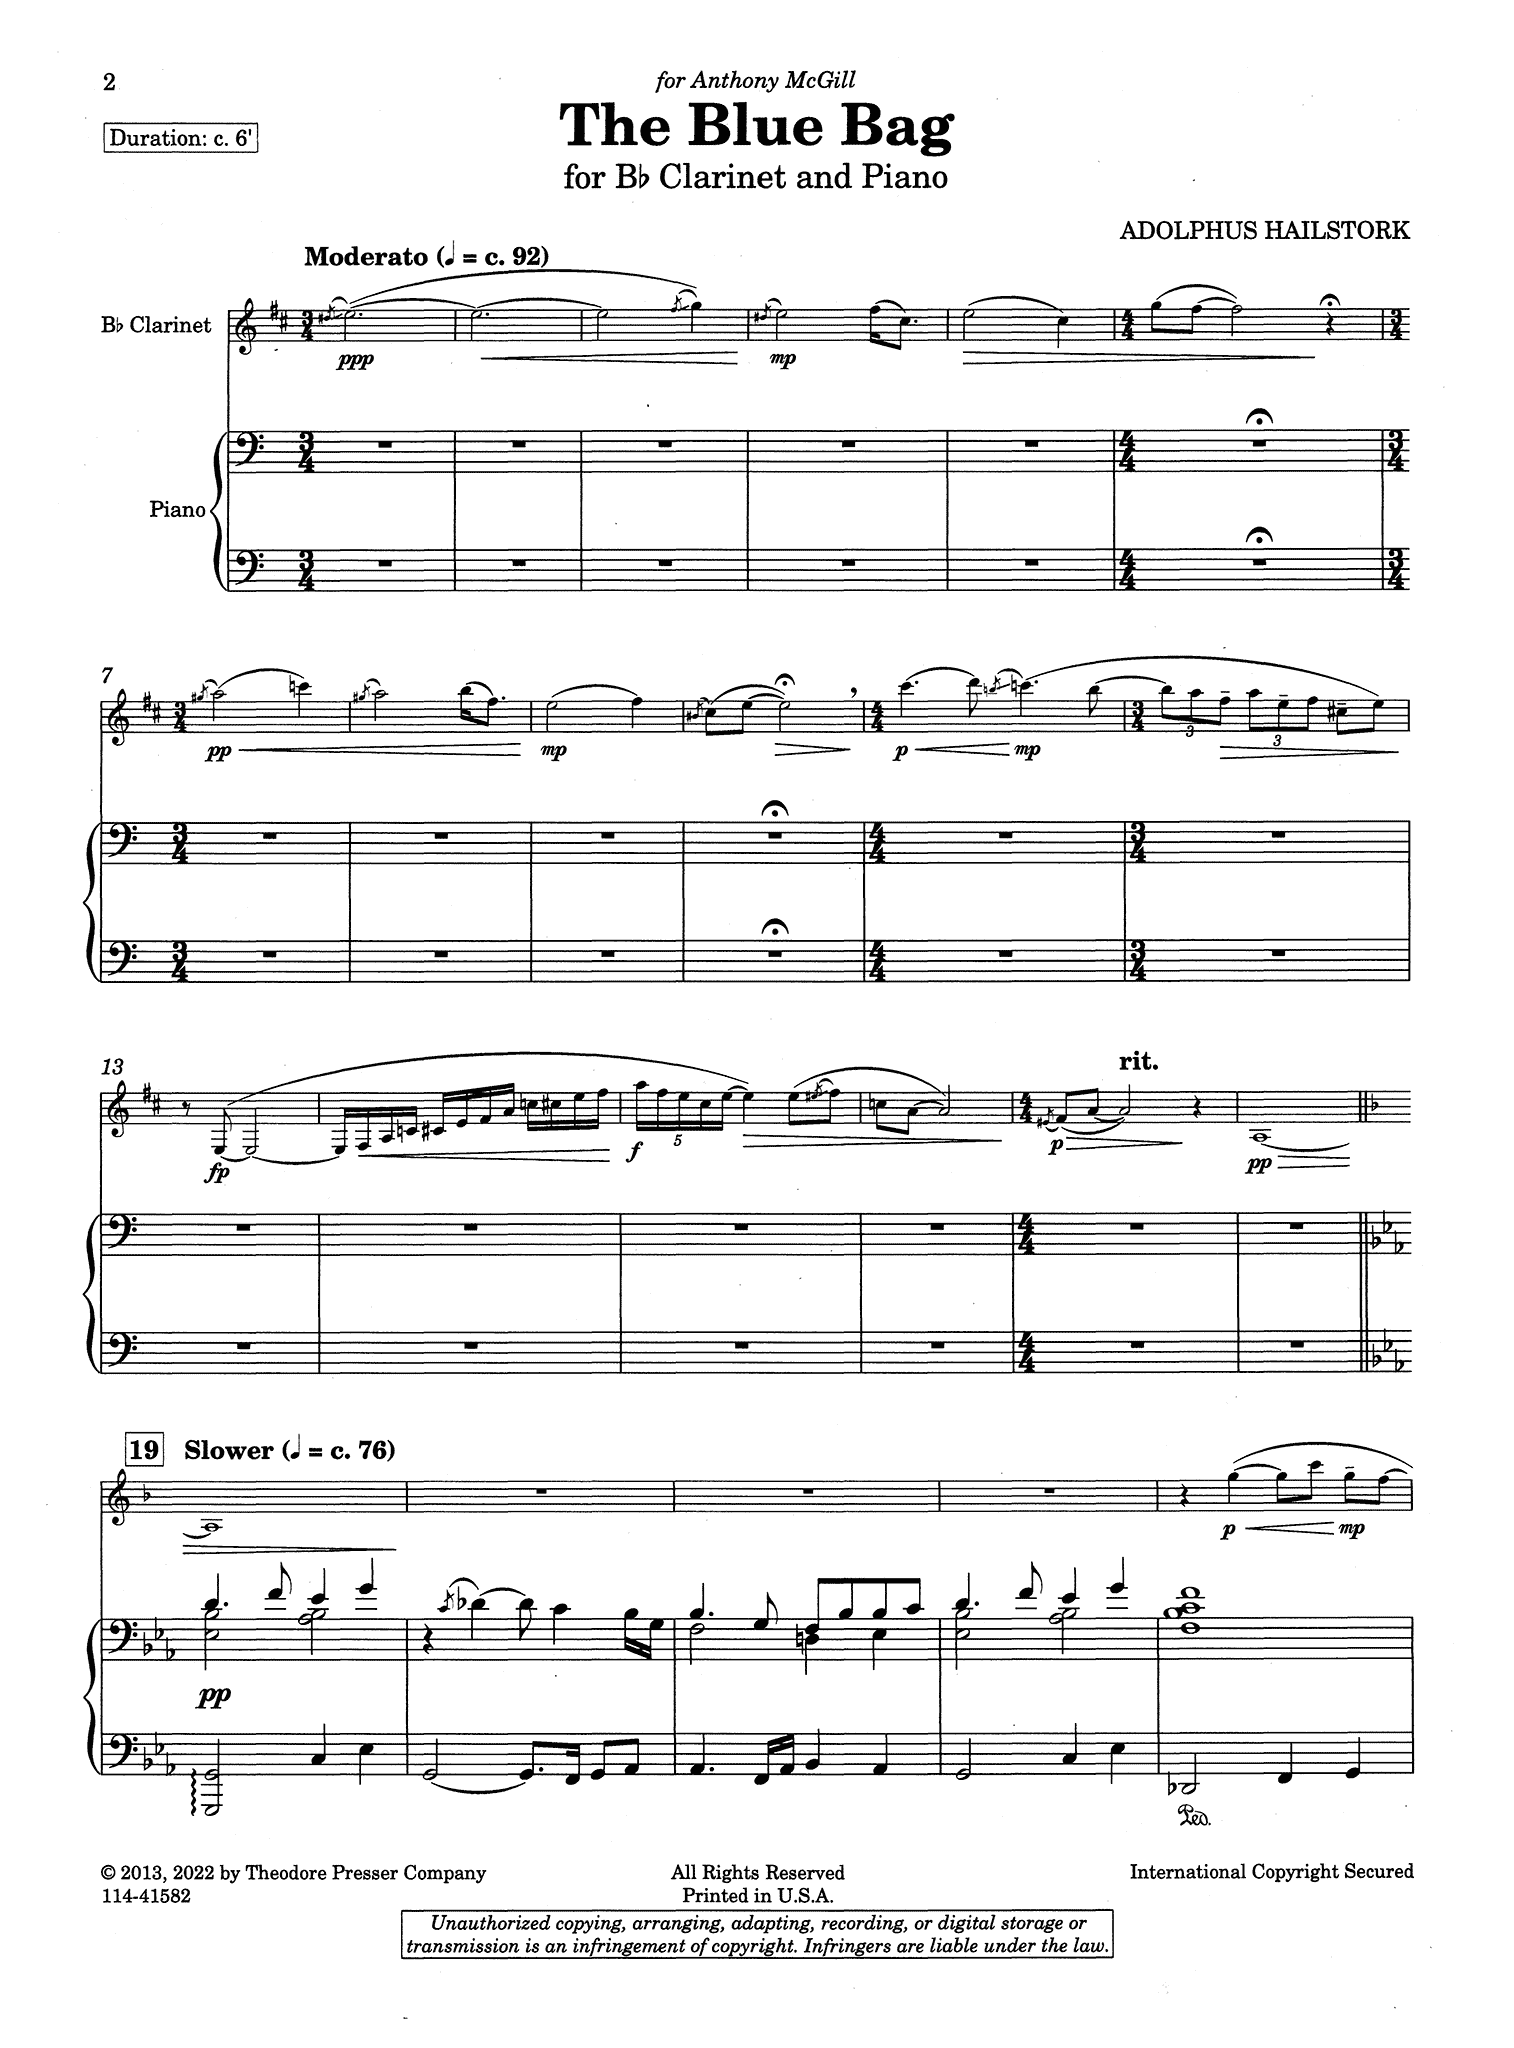 Hailstork The Blue Bag clarinet and piano score